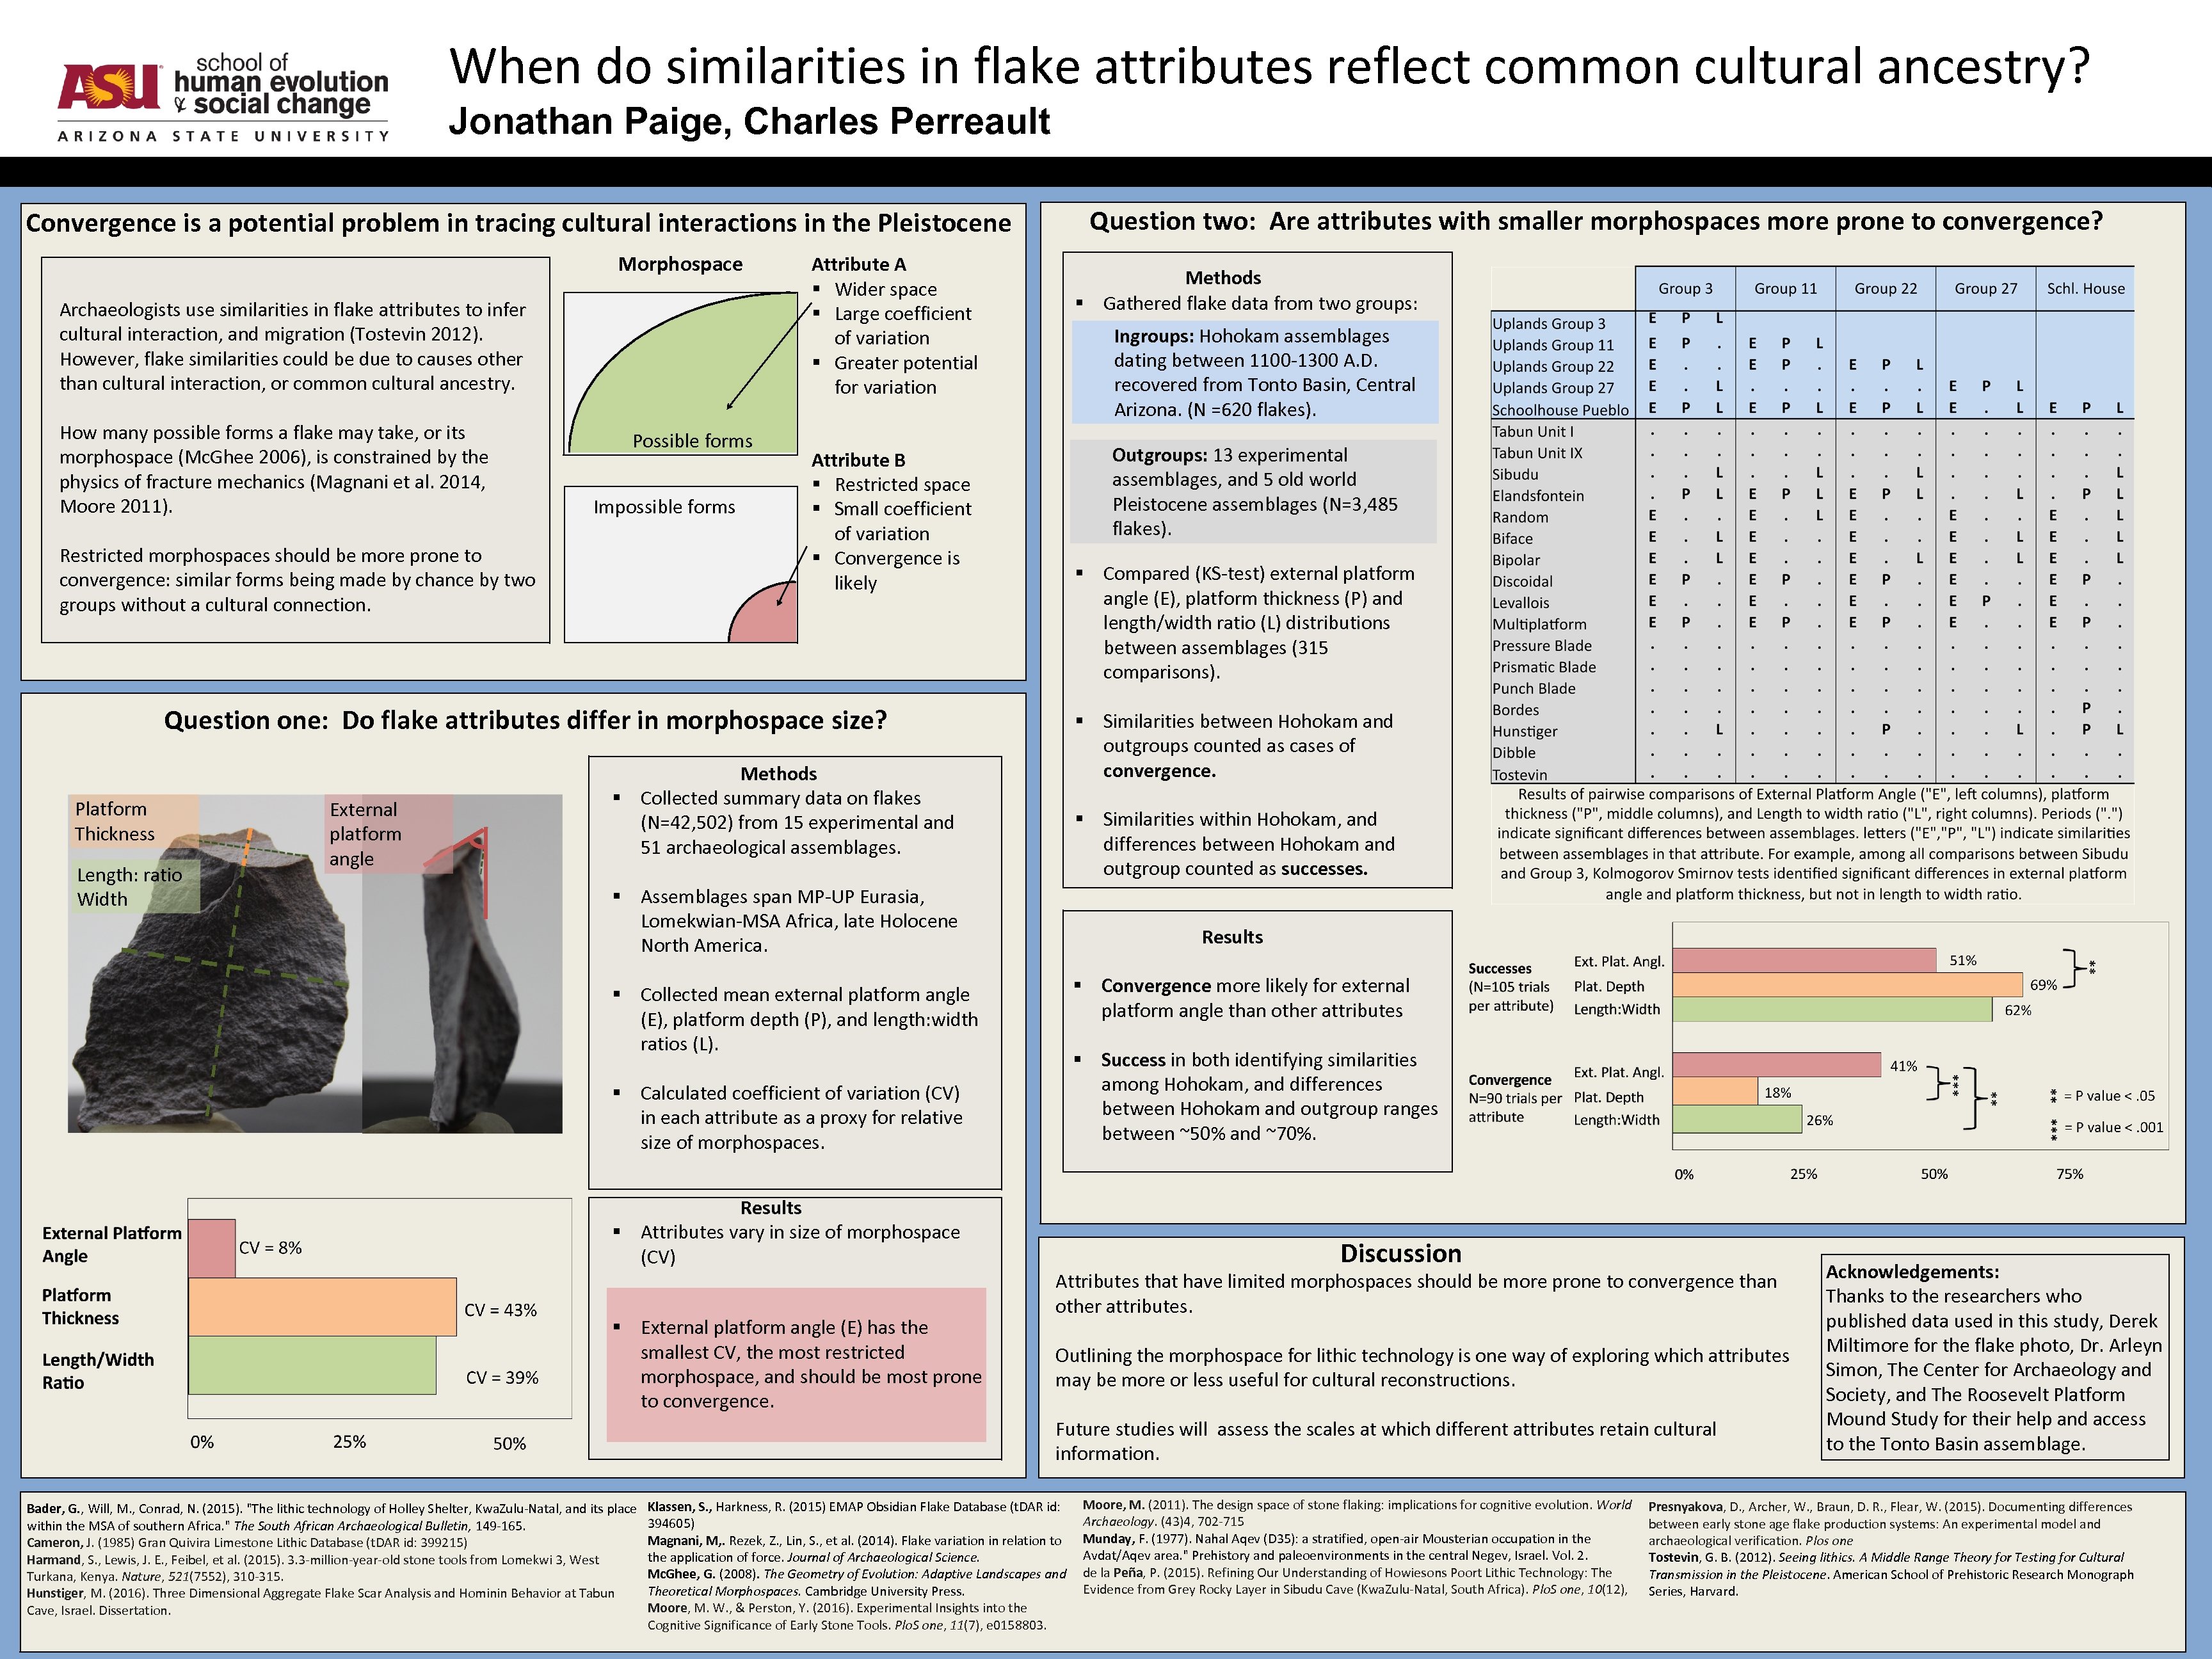 When do similarities in flake attributes reflect common cultural ancestry? Jonathan Paige, Charles Perreault